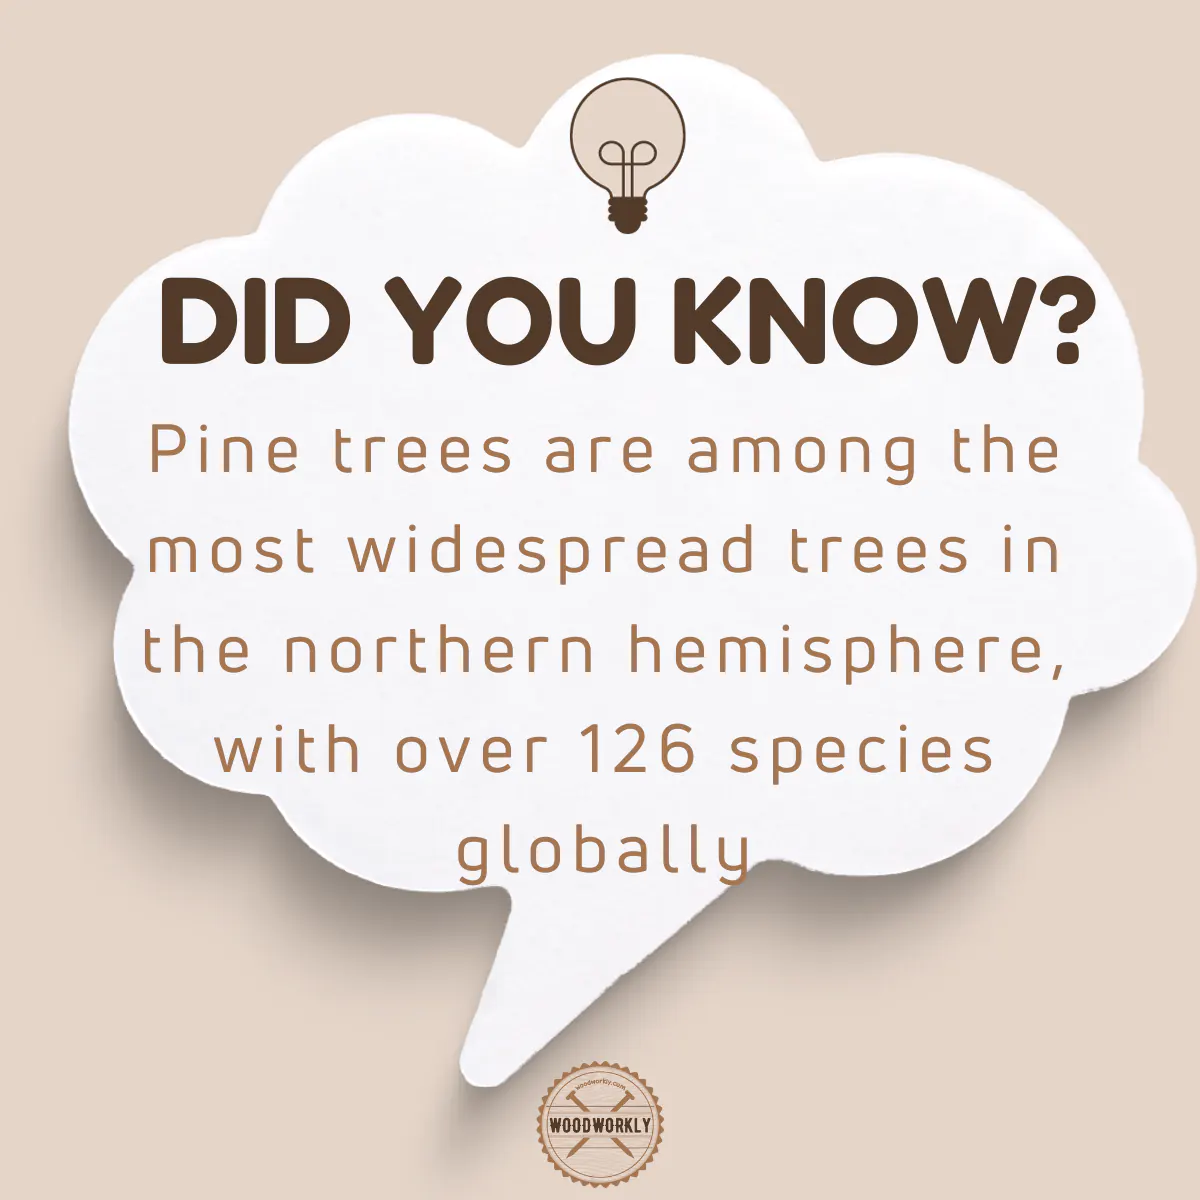 Did you know fact about Pine